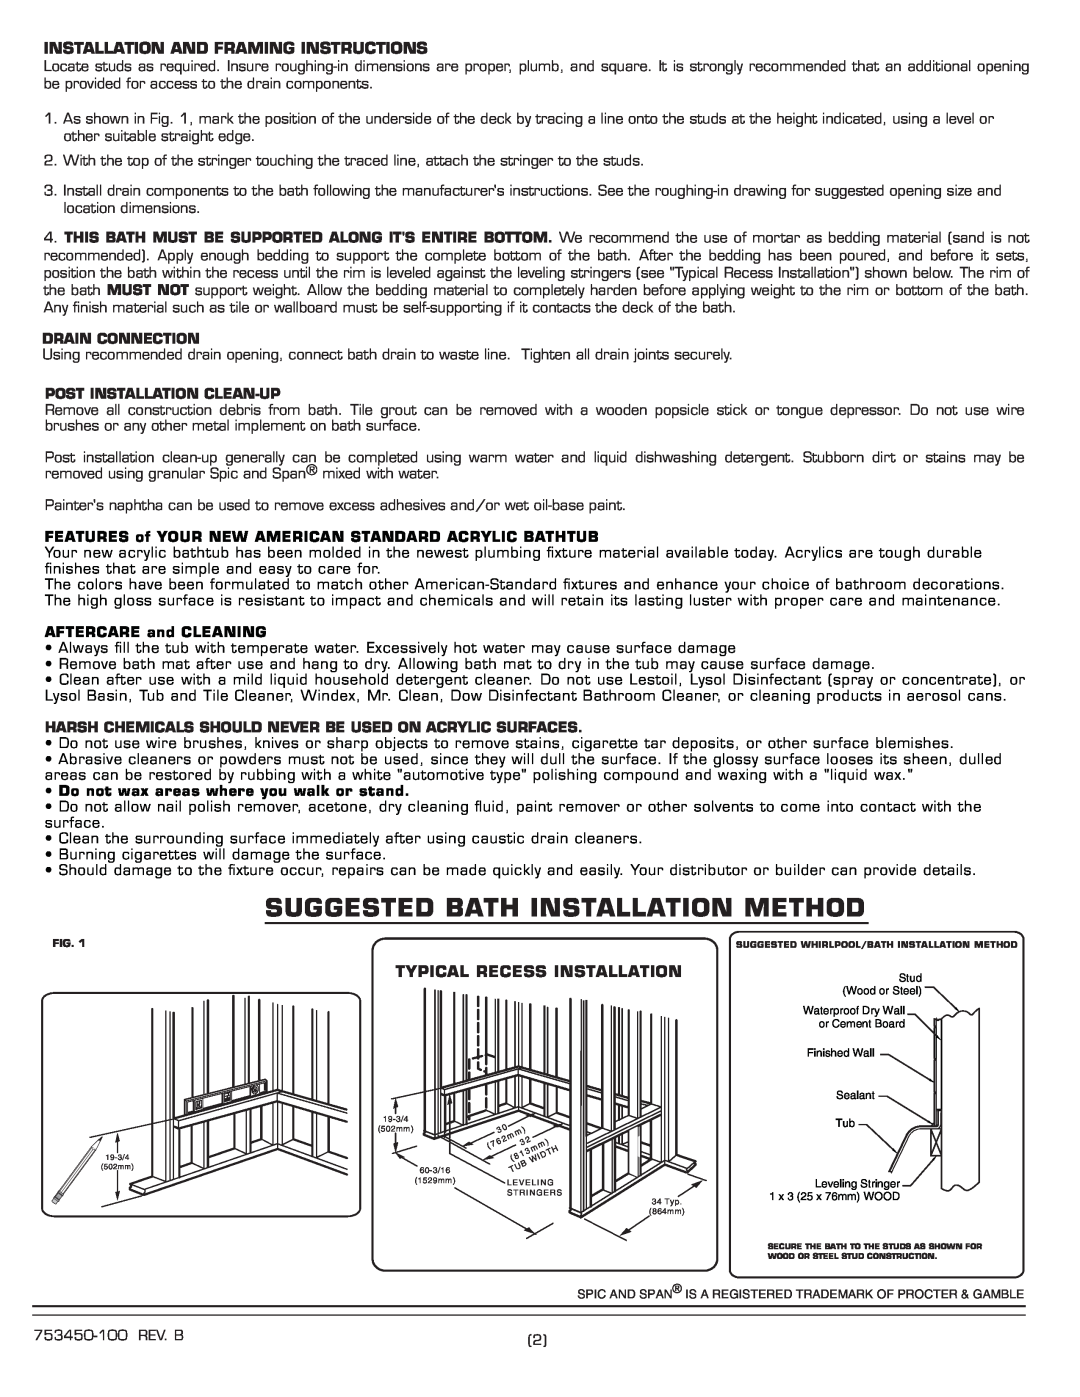 American Standard 2083 SERIES Suggested Bath Installation Method, Installation And Framing Instructions, Drain Connection 